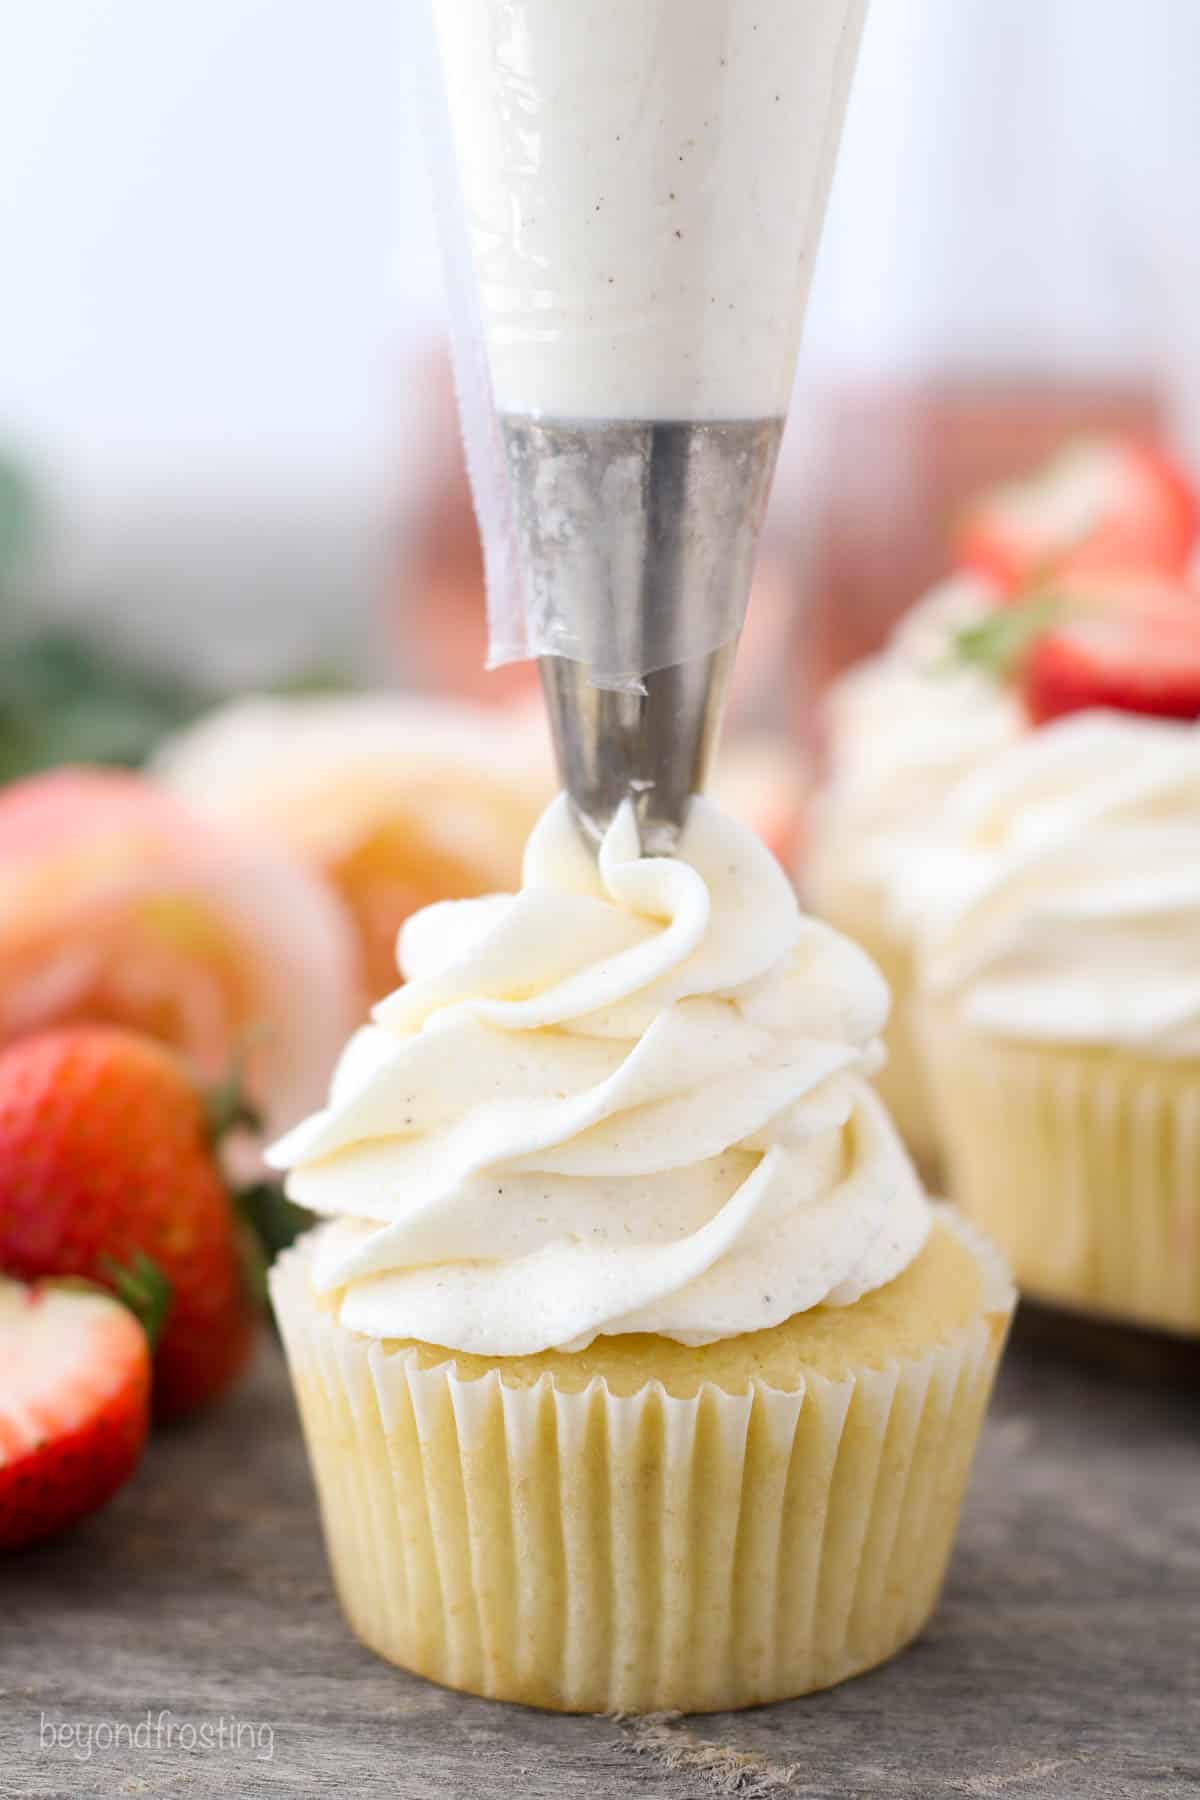 buttercream frosting being piped onto a strawberry rosé cupcake